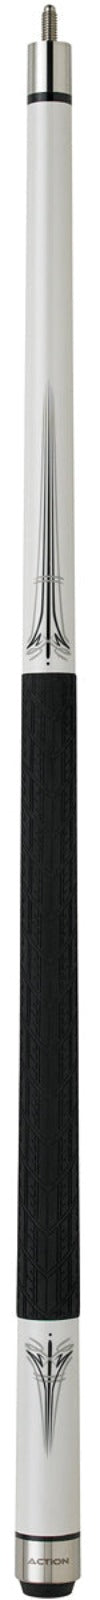 Action KRM01 Pool Cue -Action